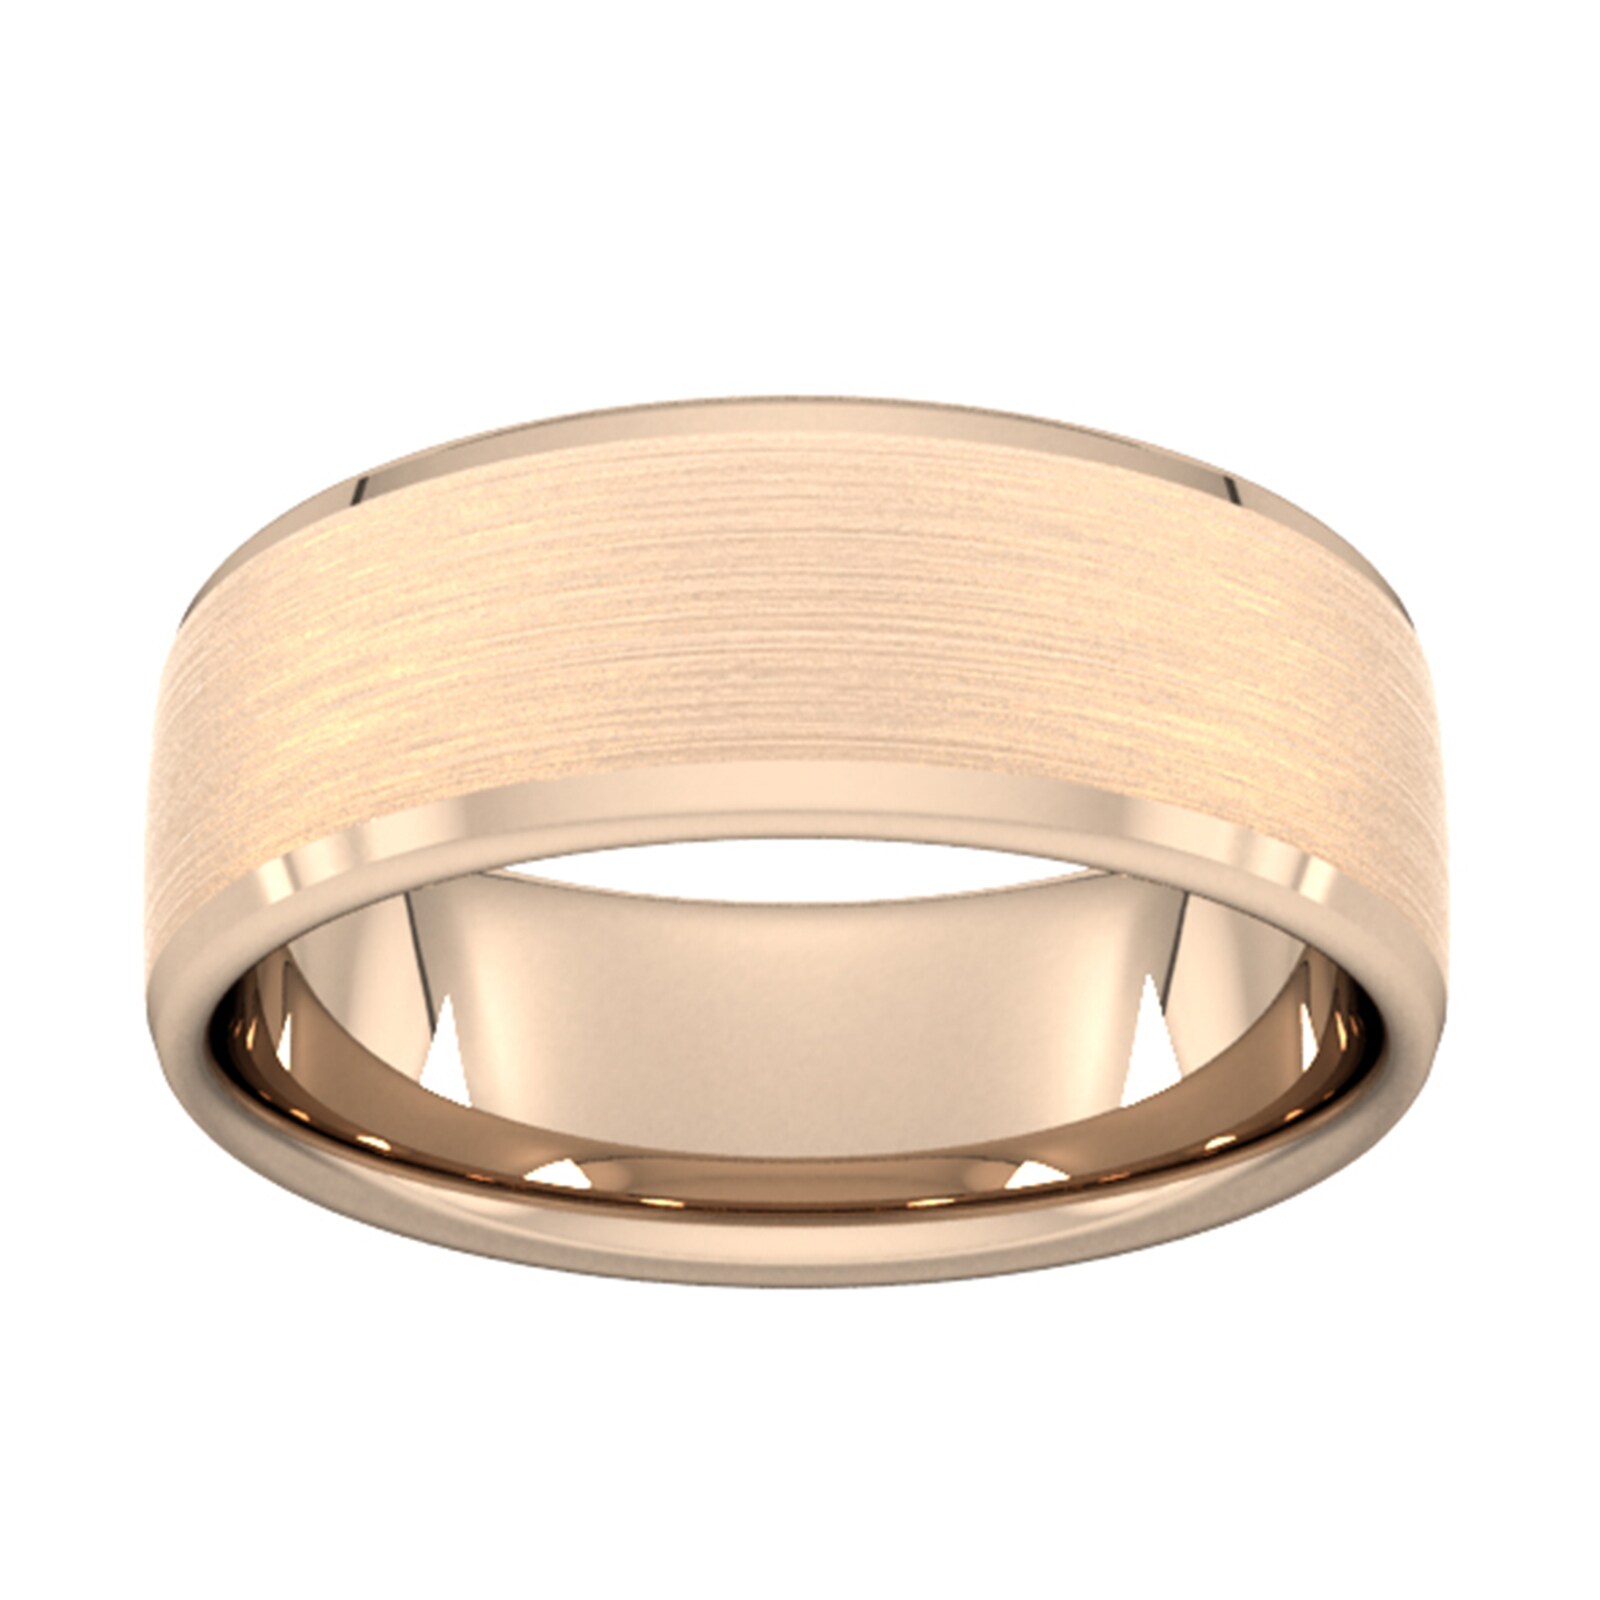 8mm Slight Court Standard Polished Chamfered Edges With Matt Centre Wedding Ring In 9 Carat Rose Gold - Ring Size N